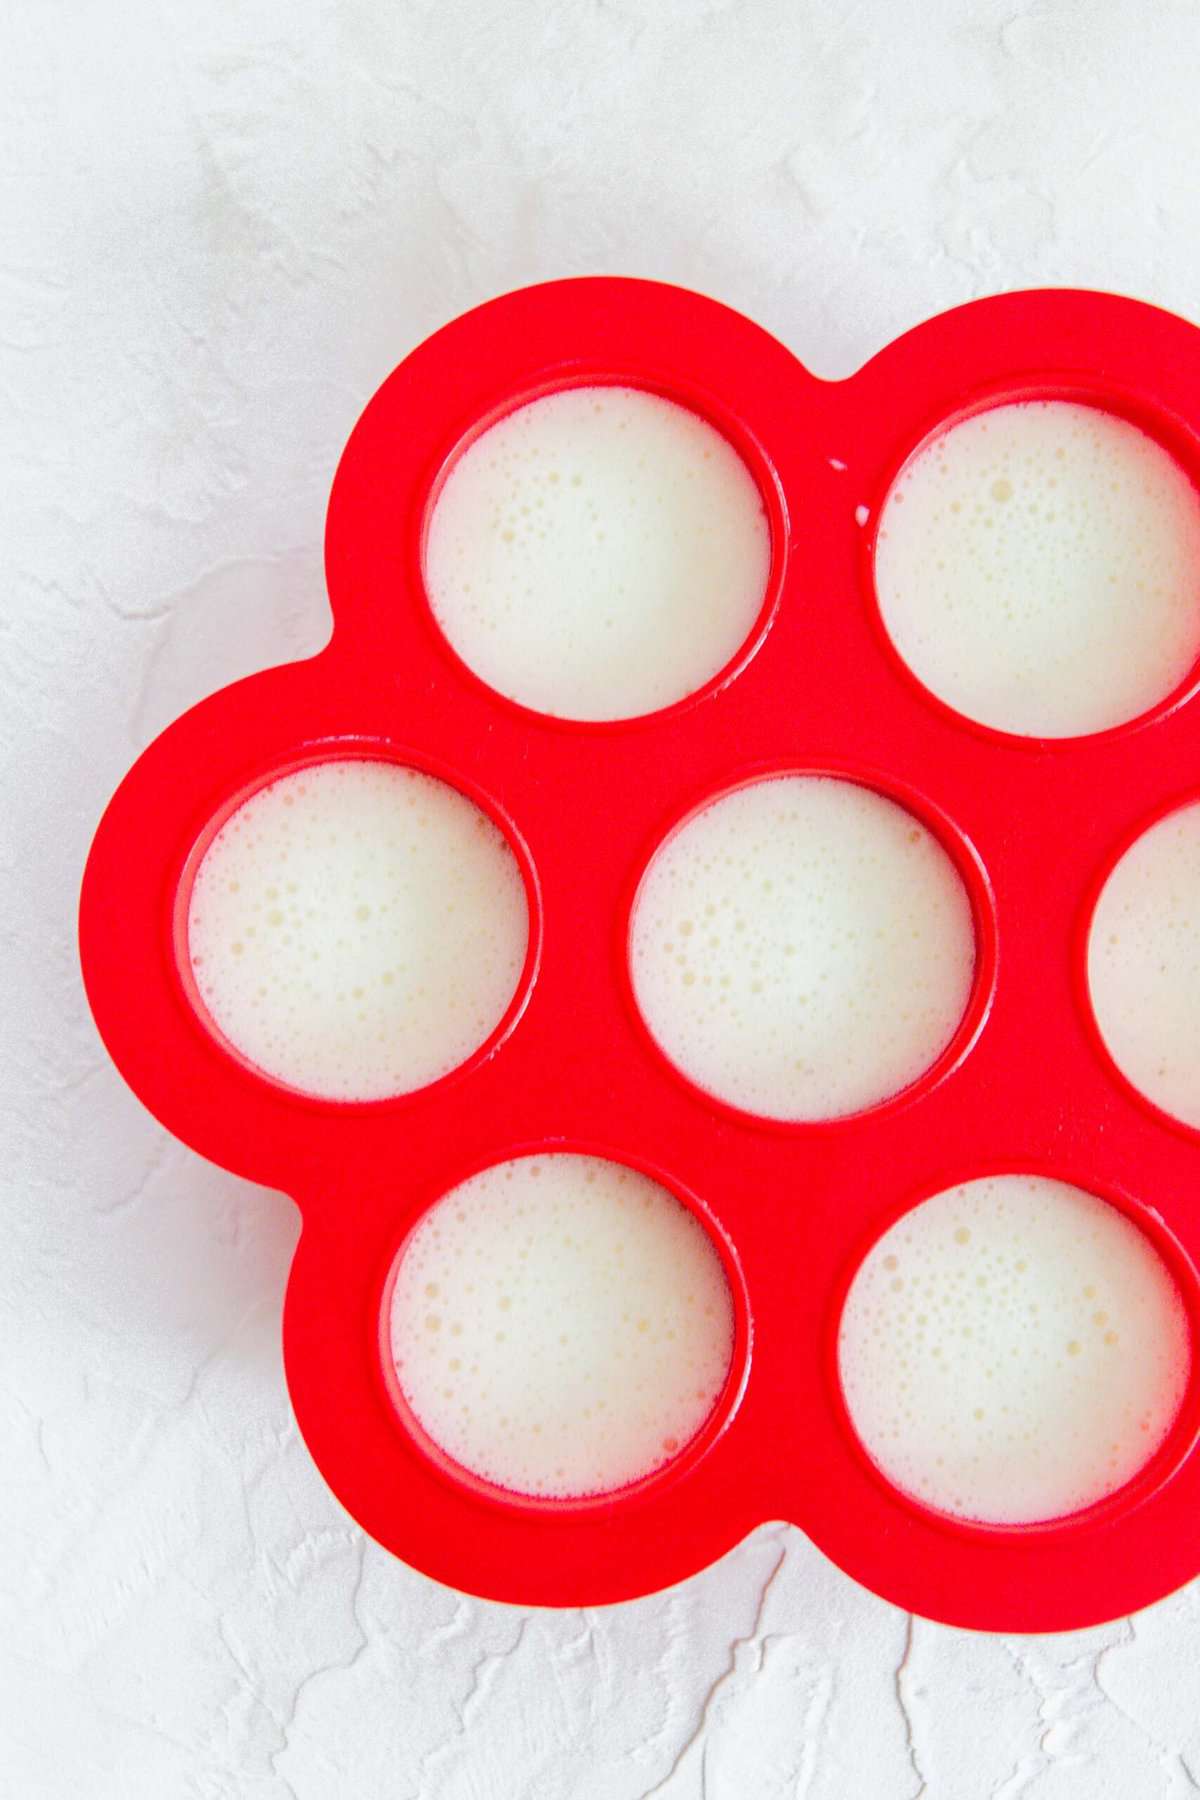 red silicone egg mold filled with egg white mixture